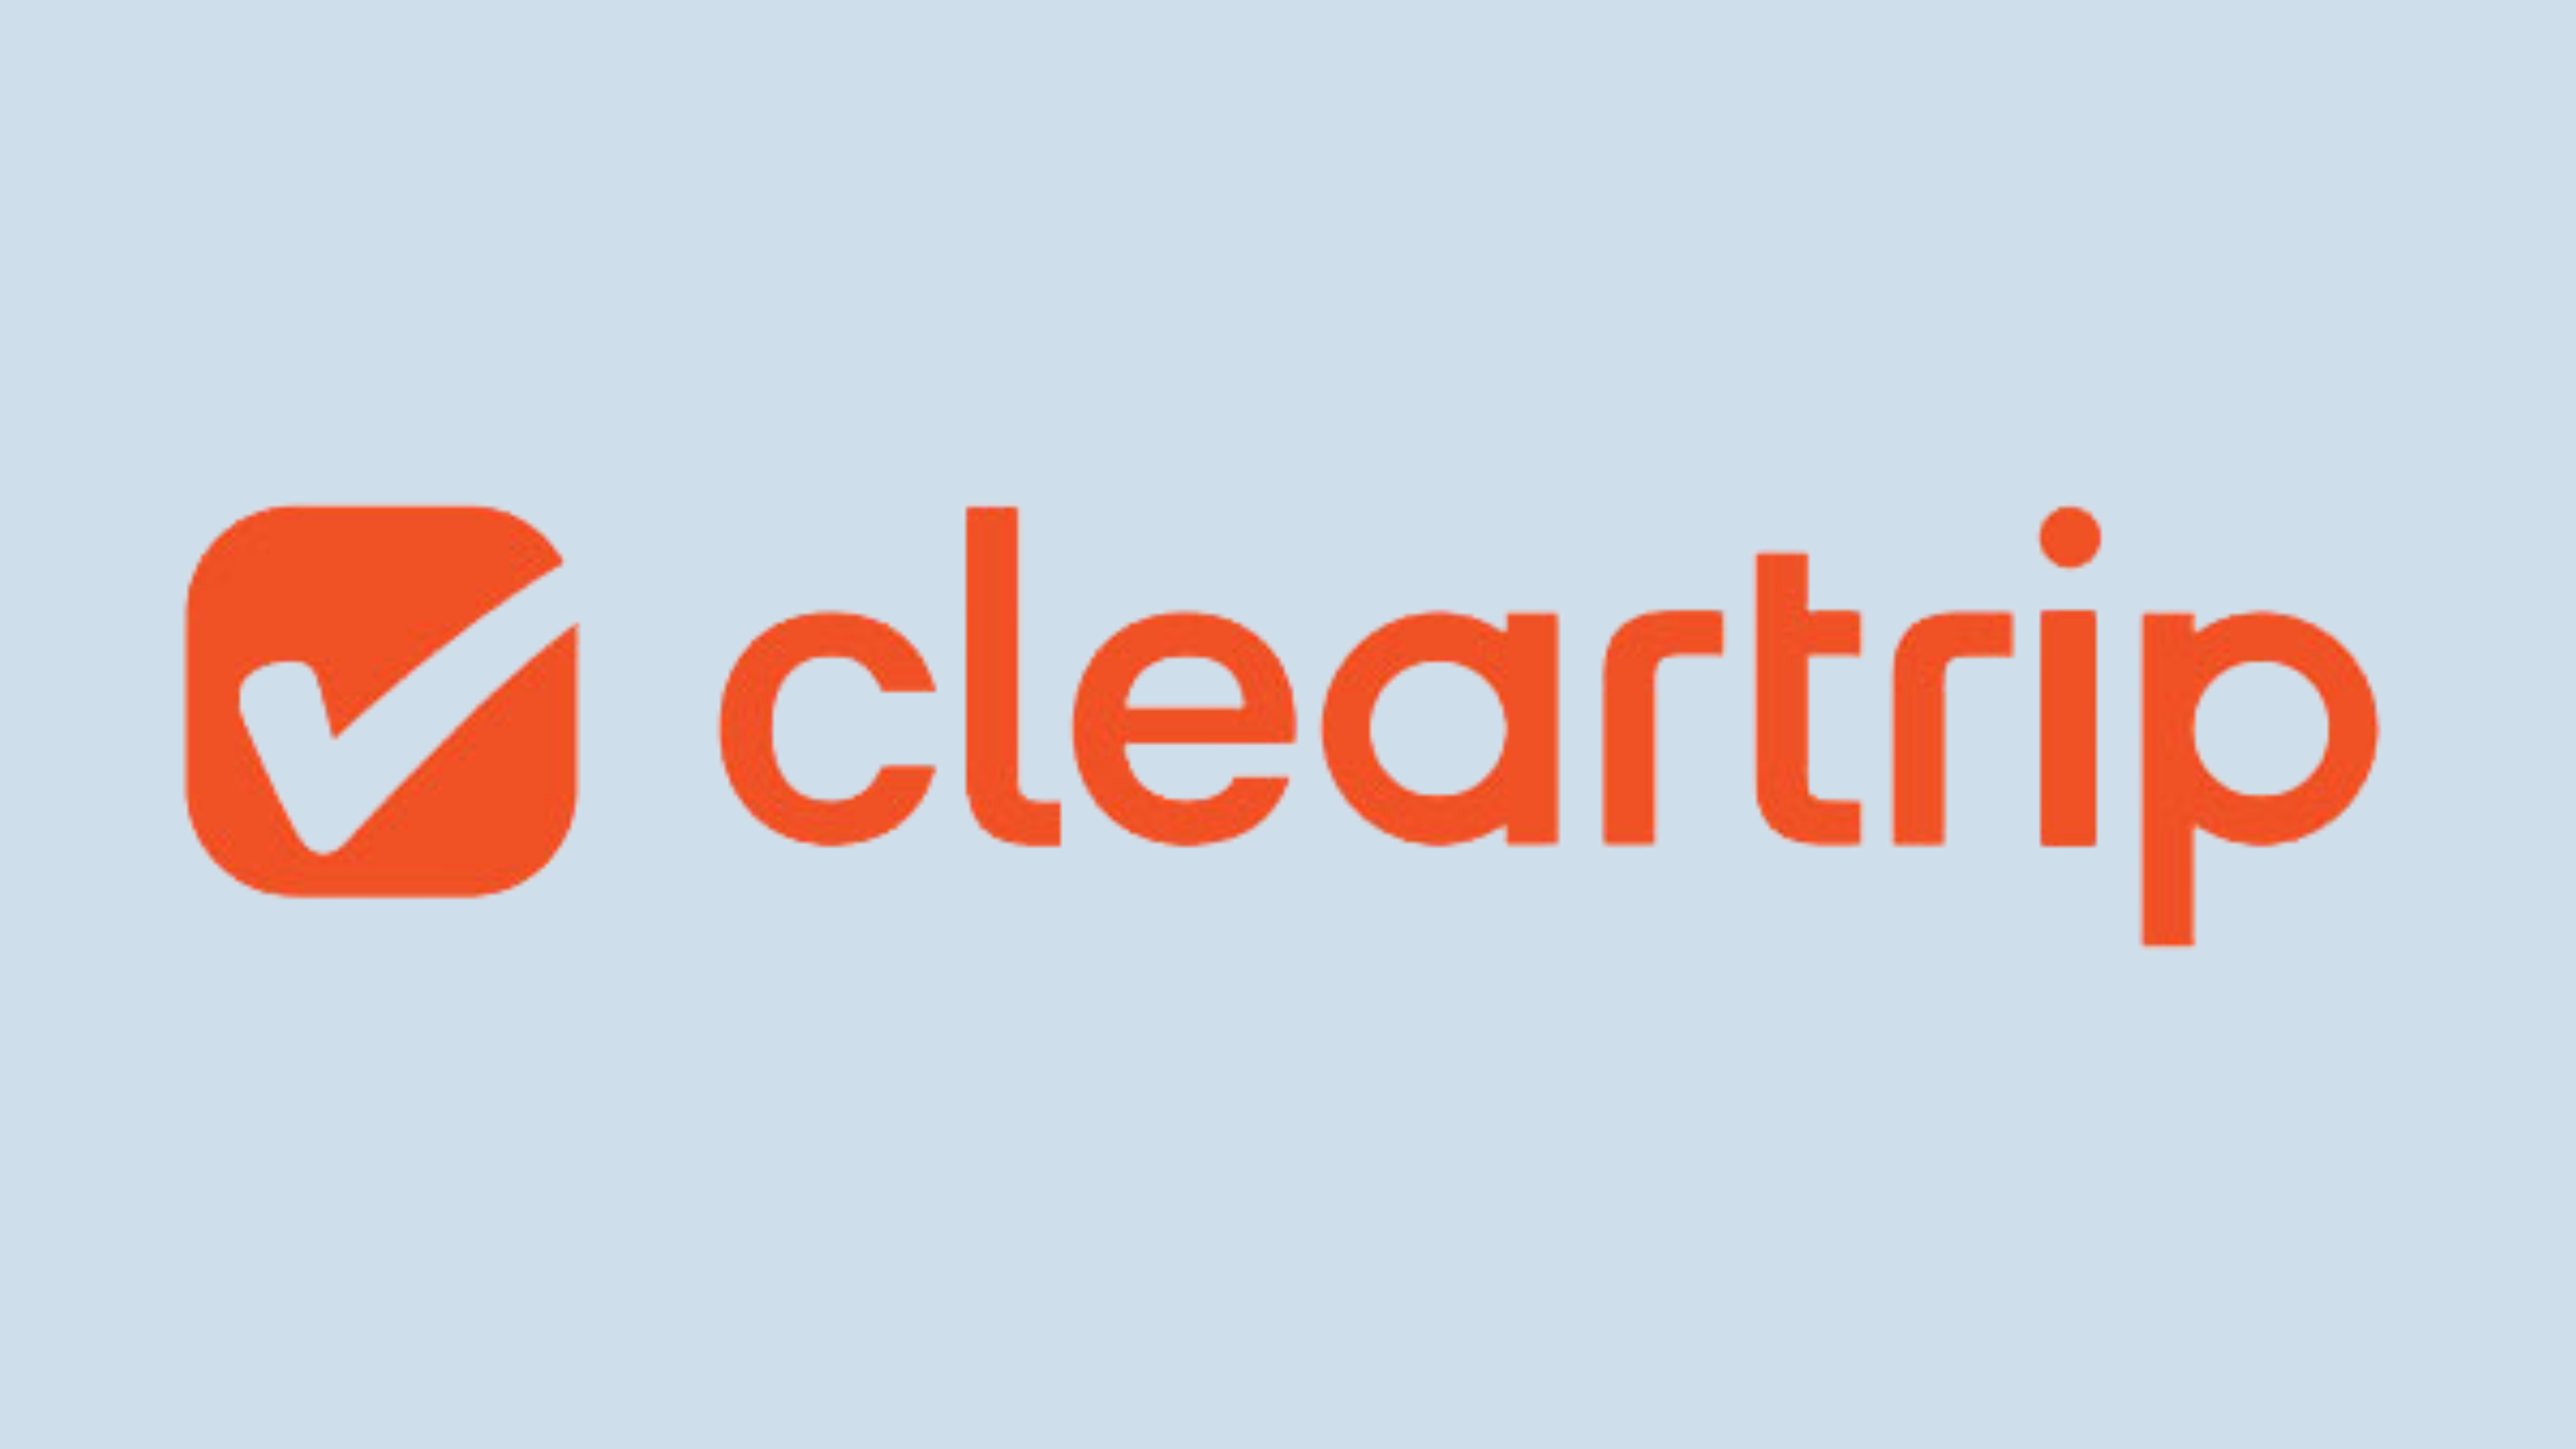 Cleartrip – 51% Rise in Organic Traffic From 8.3M to 12.6M